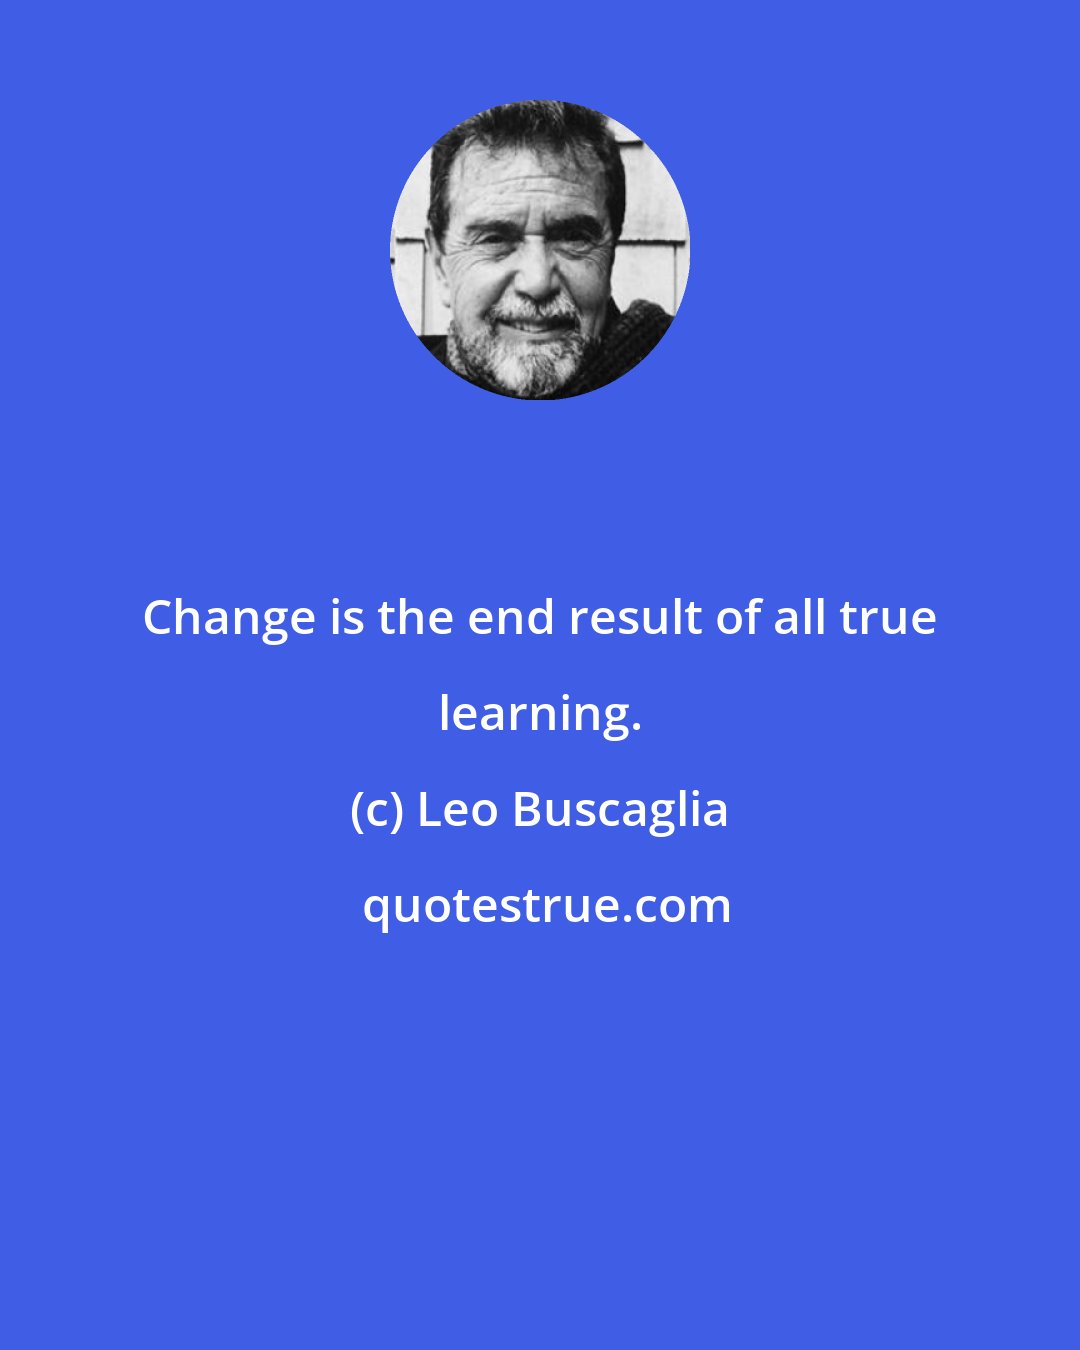 Leo Buscaglia: Change is the end result of all true learning.